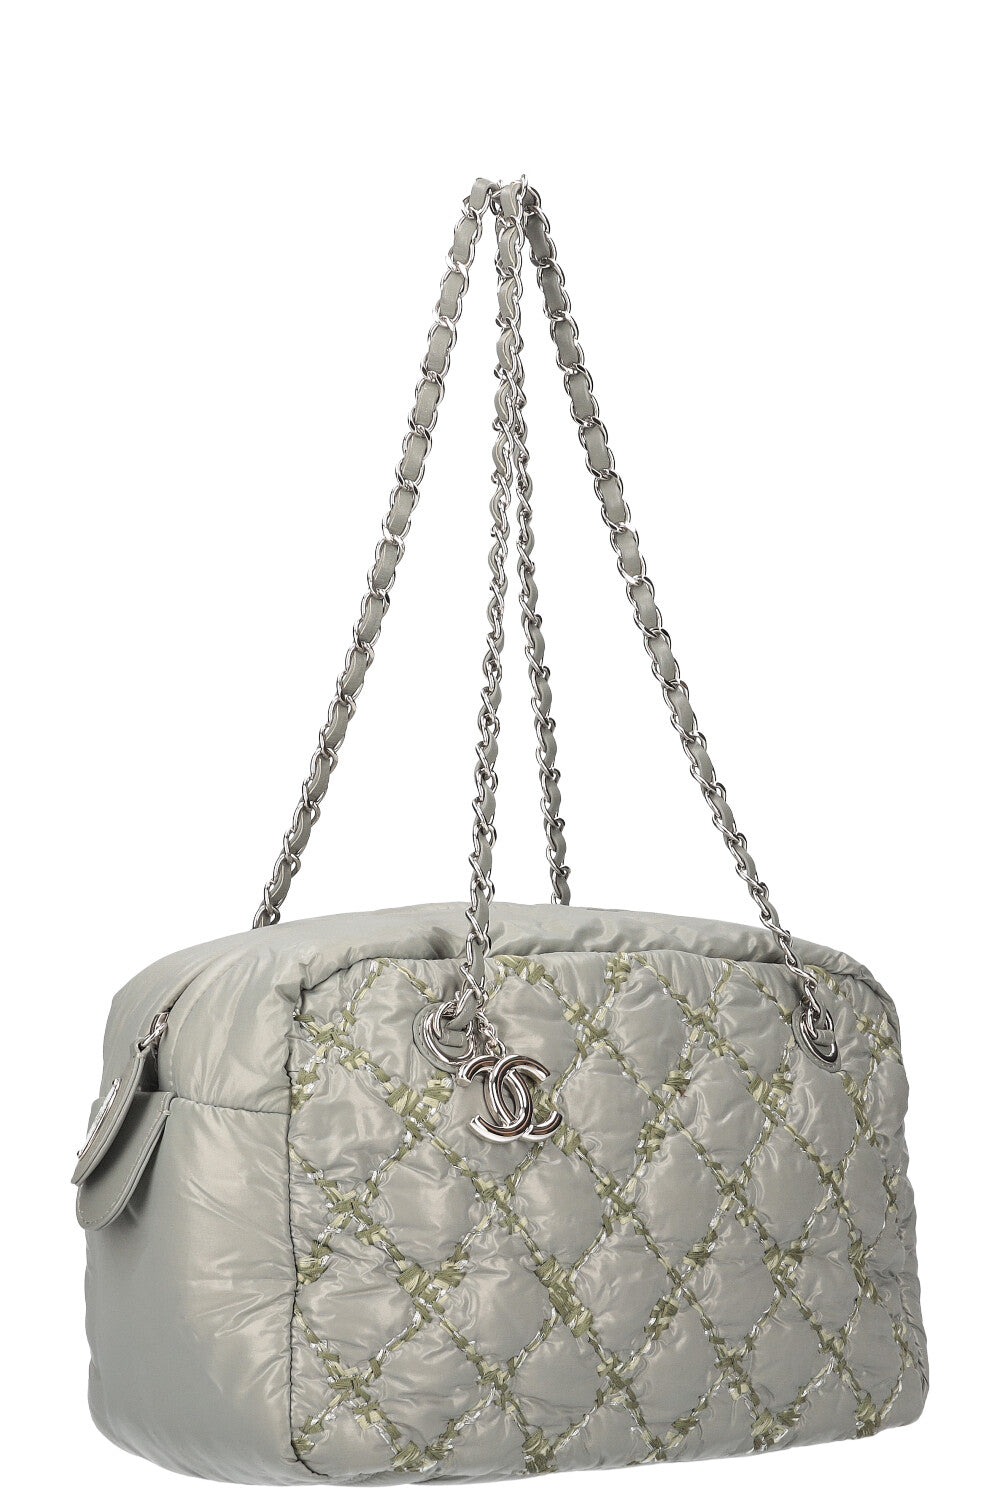 CHANEL Quilted Bubble Nylon Tweed Stitch Bag Grey